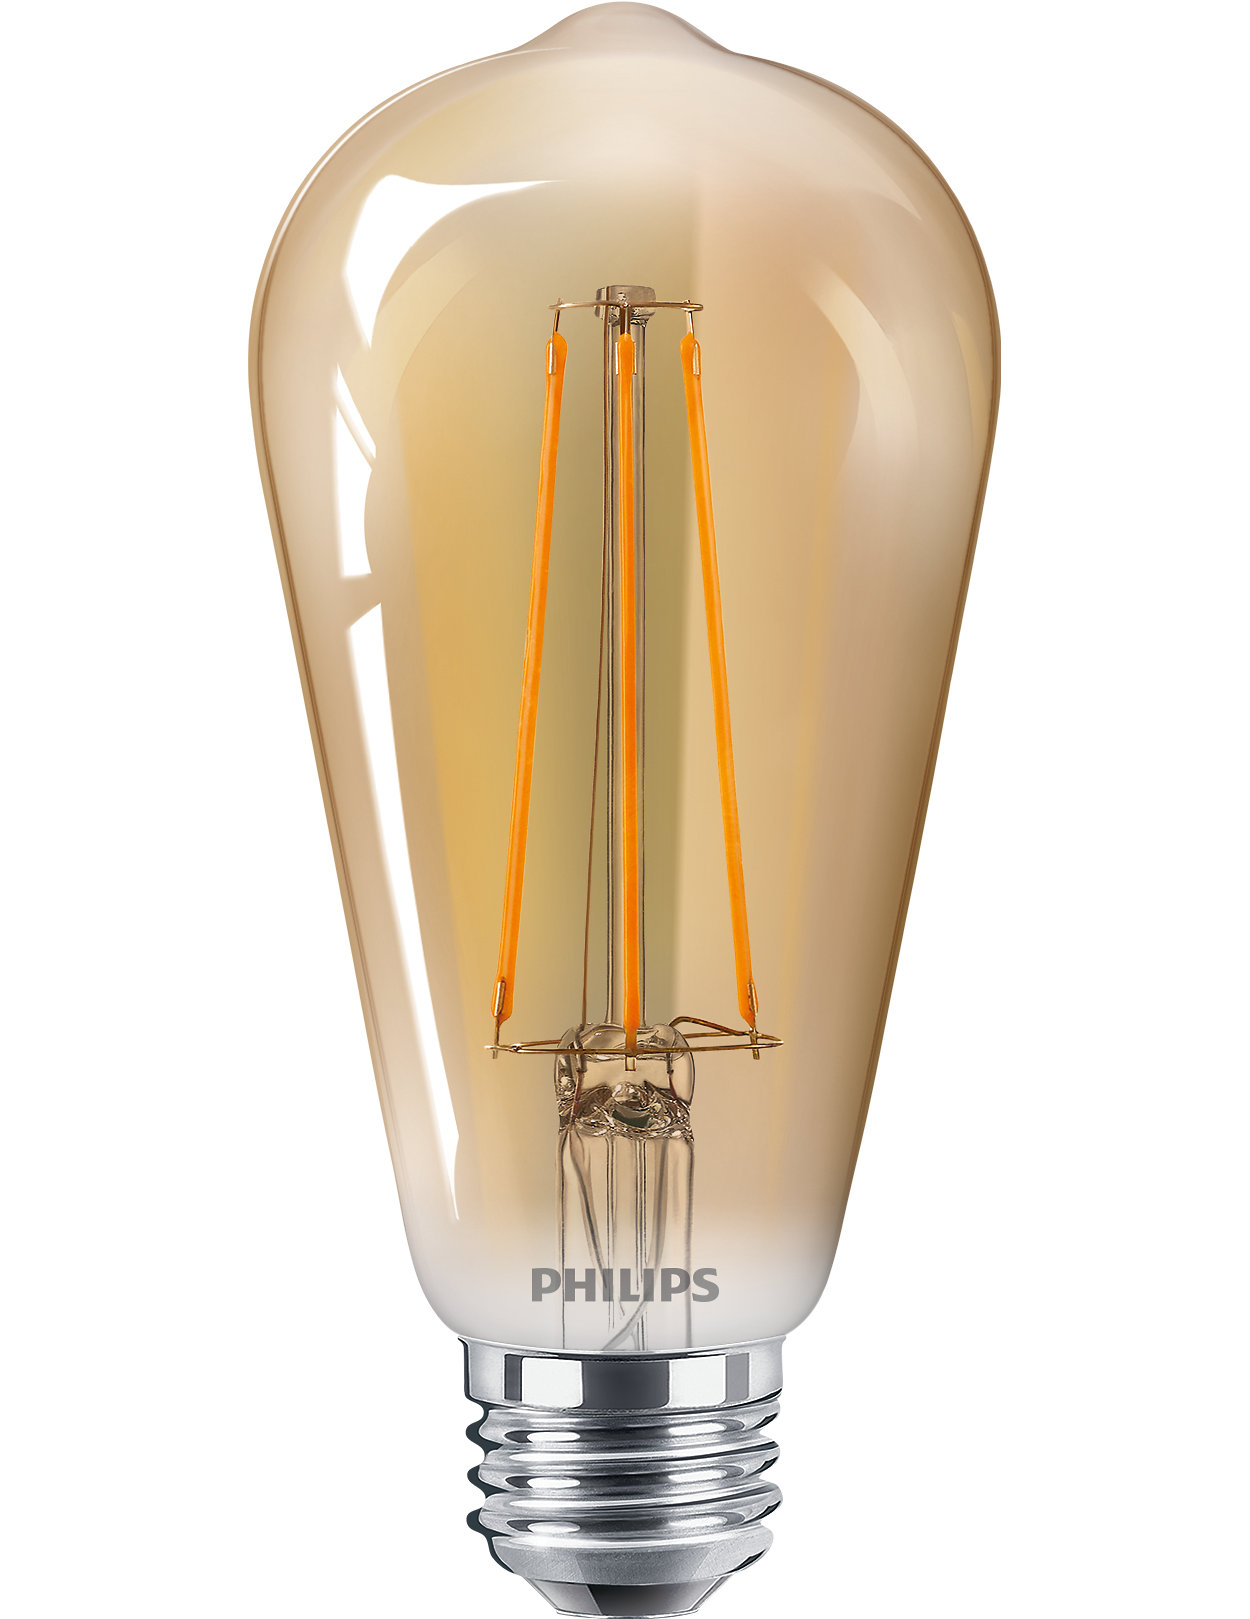 Create a vintage or modern look while saving money with LED technology 